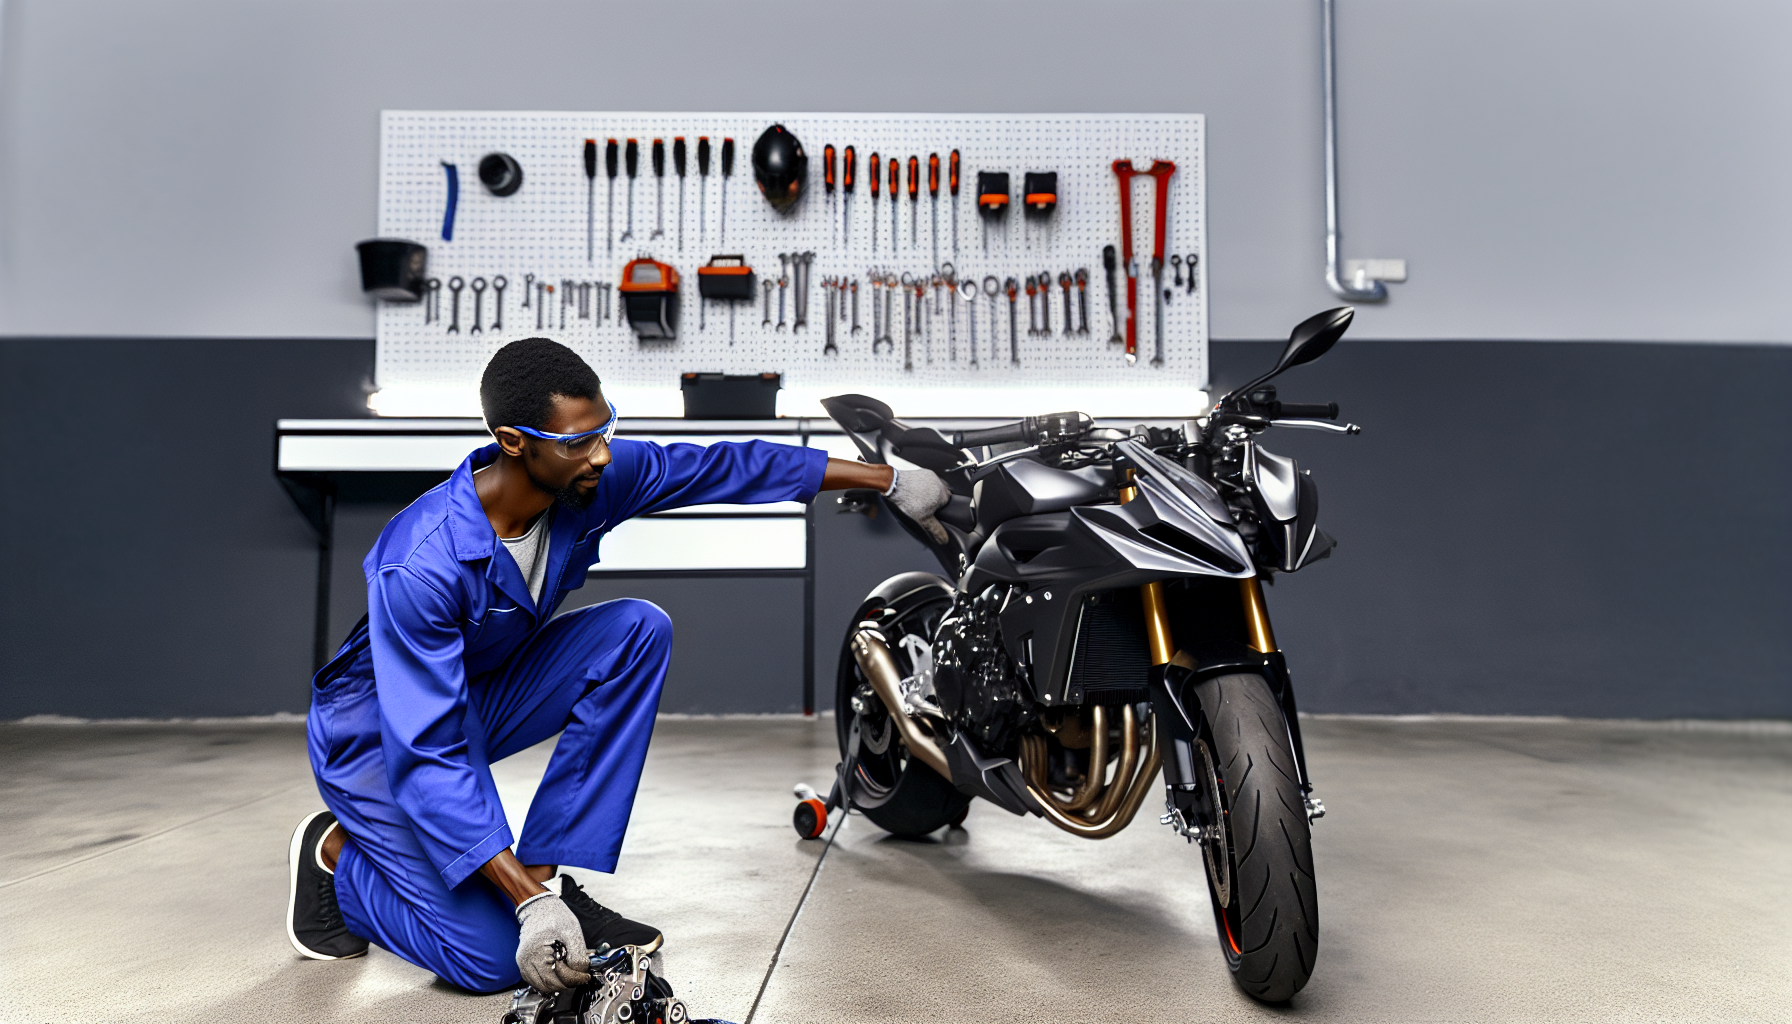 Mechanic performing maintenance on a motorcycle